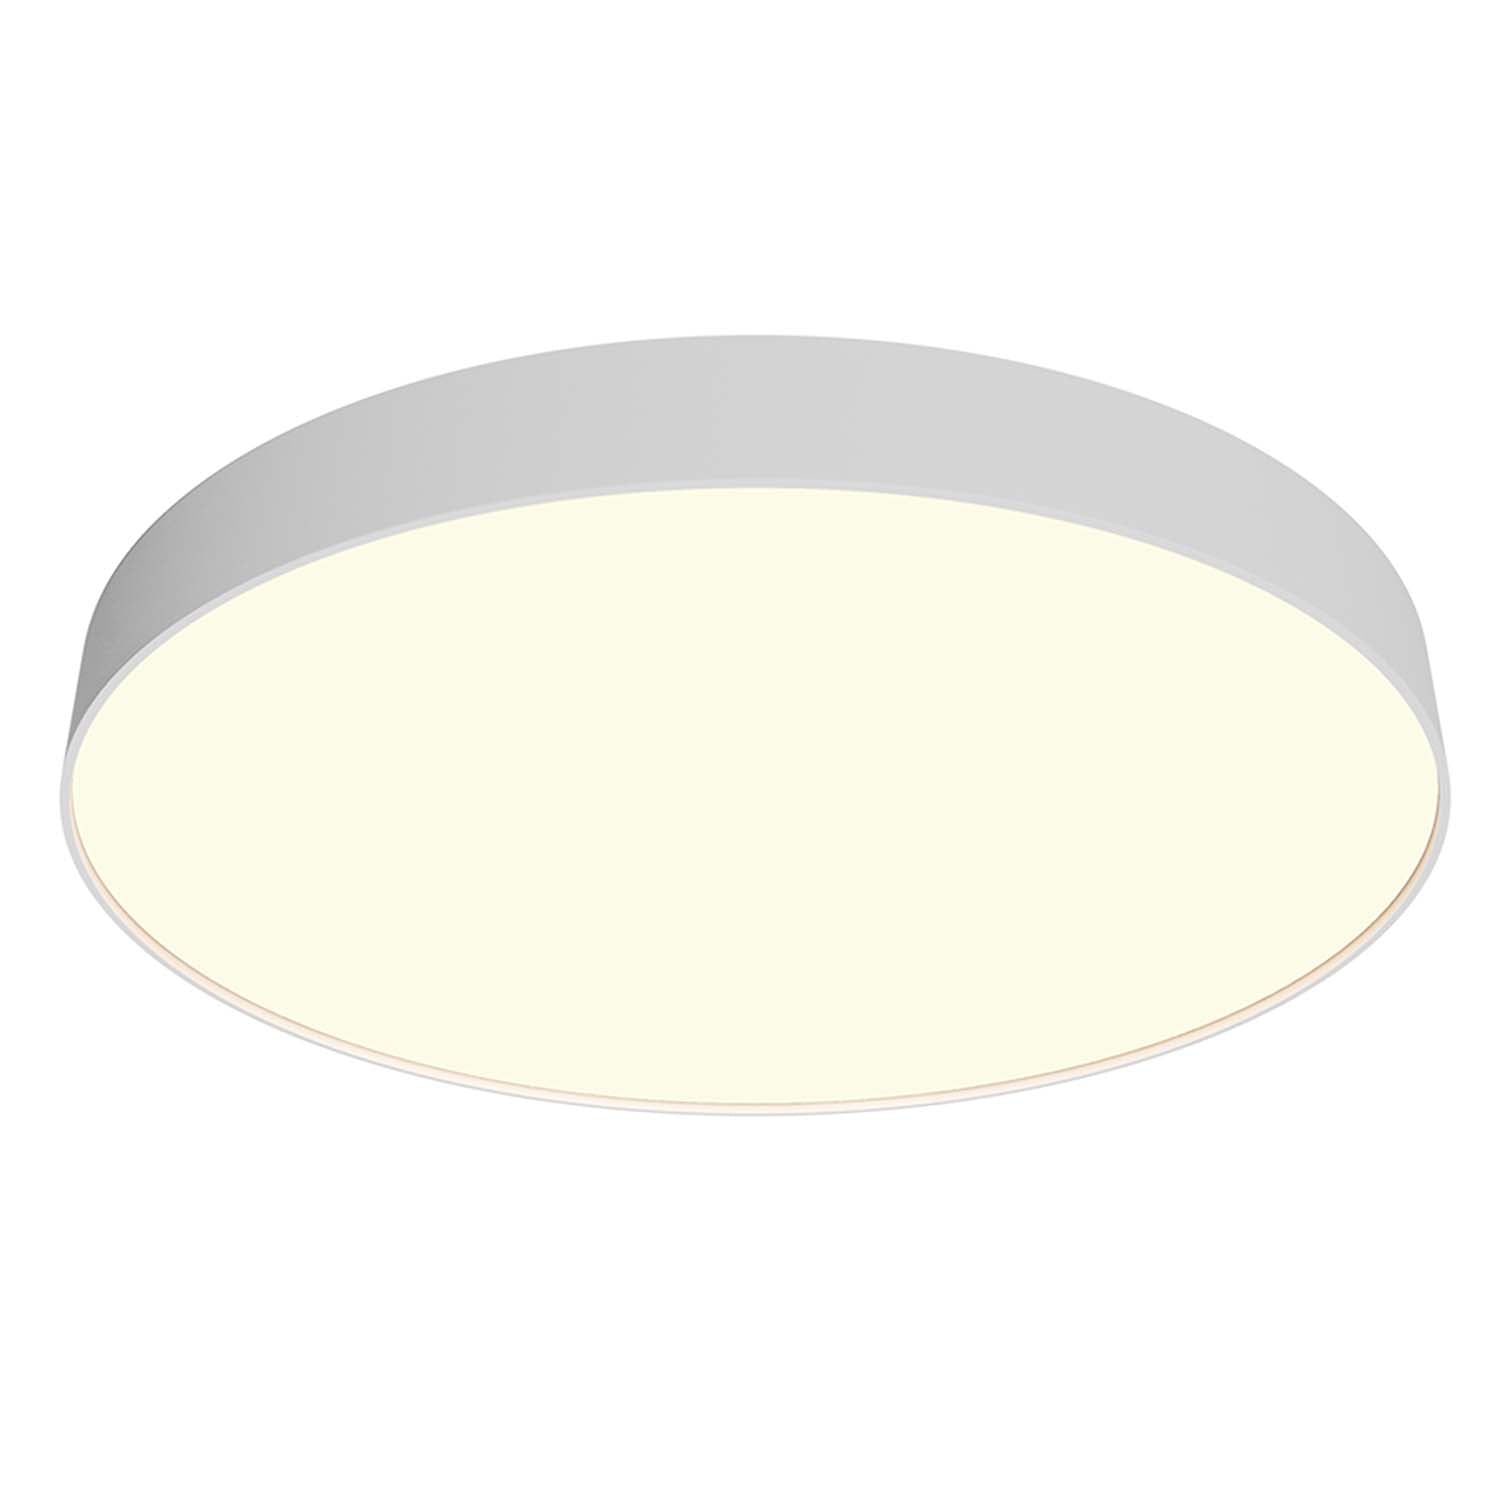 ZON - Designer and minimalist integrated LED ceiling light